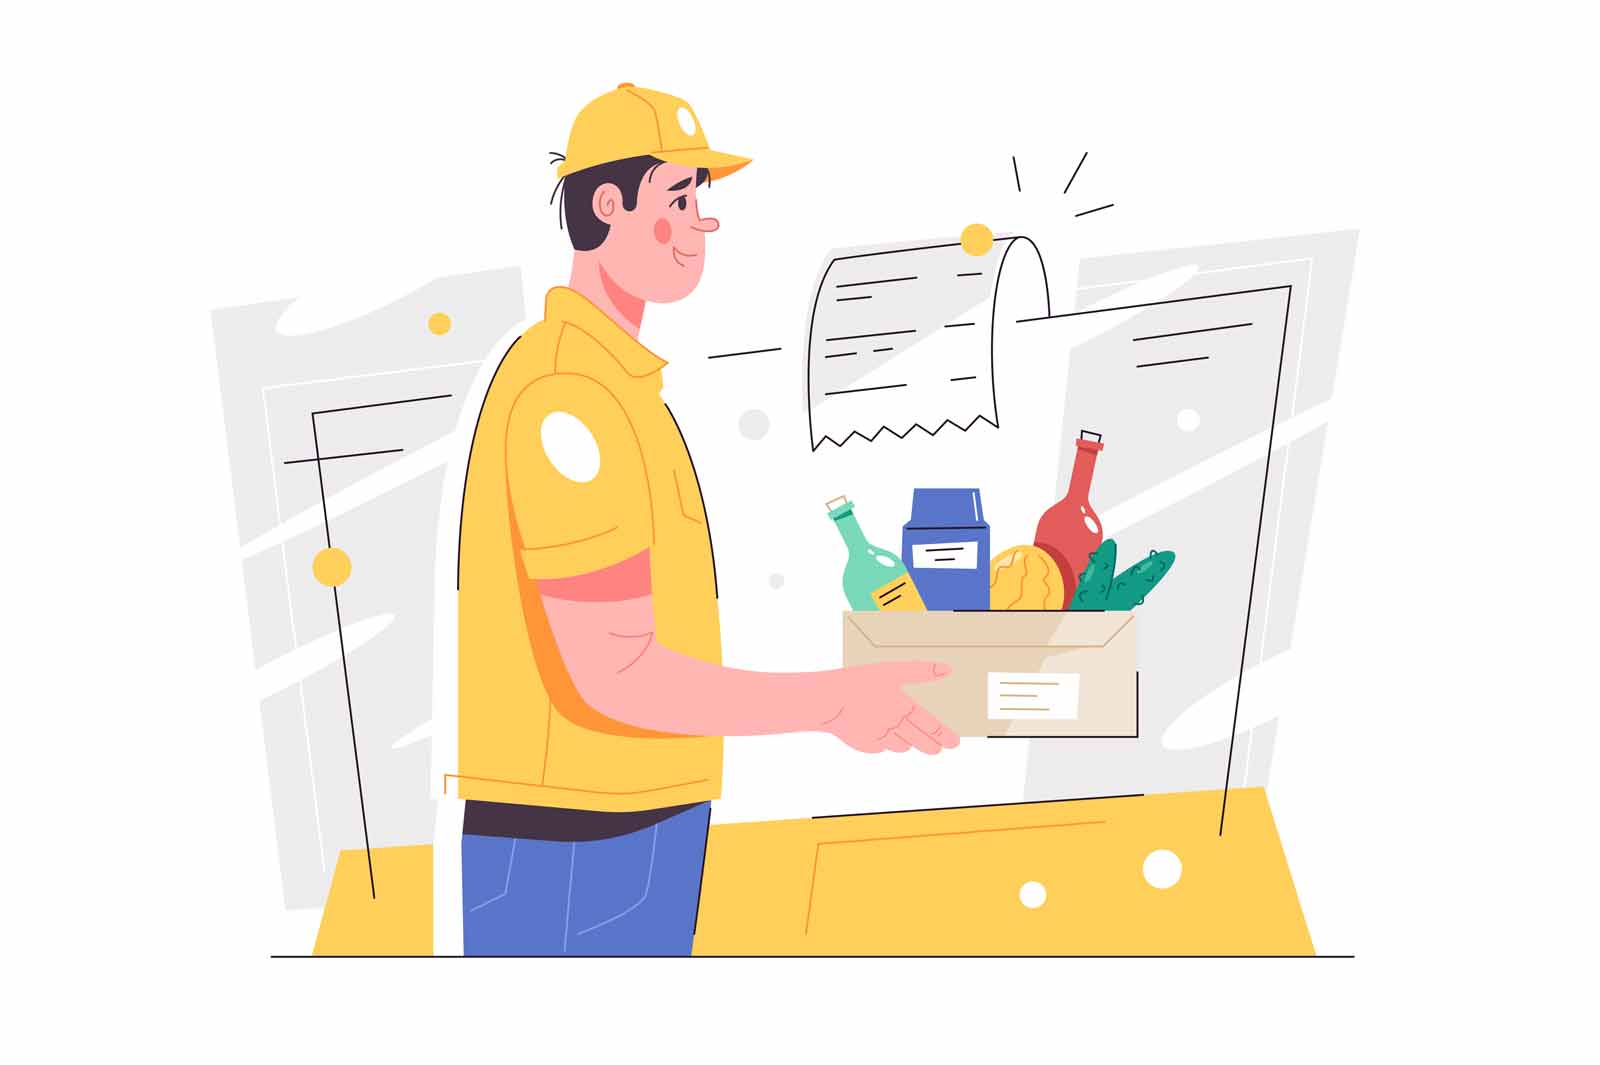 Guy food delivery service worker with product set vector illustration. Worker bring order to address flat style. Delivery service concept